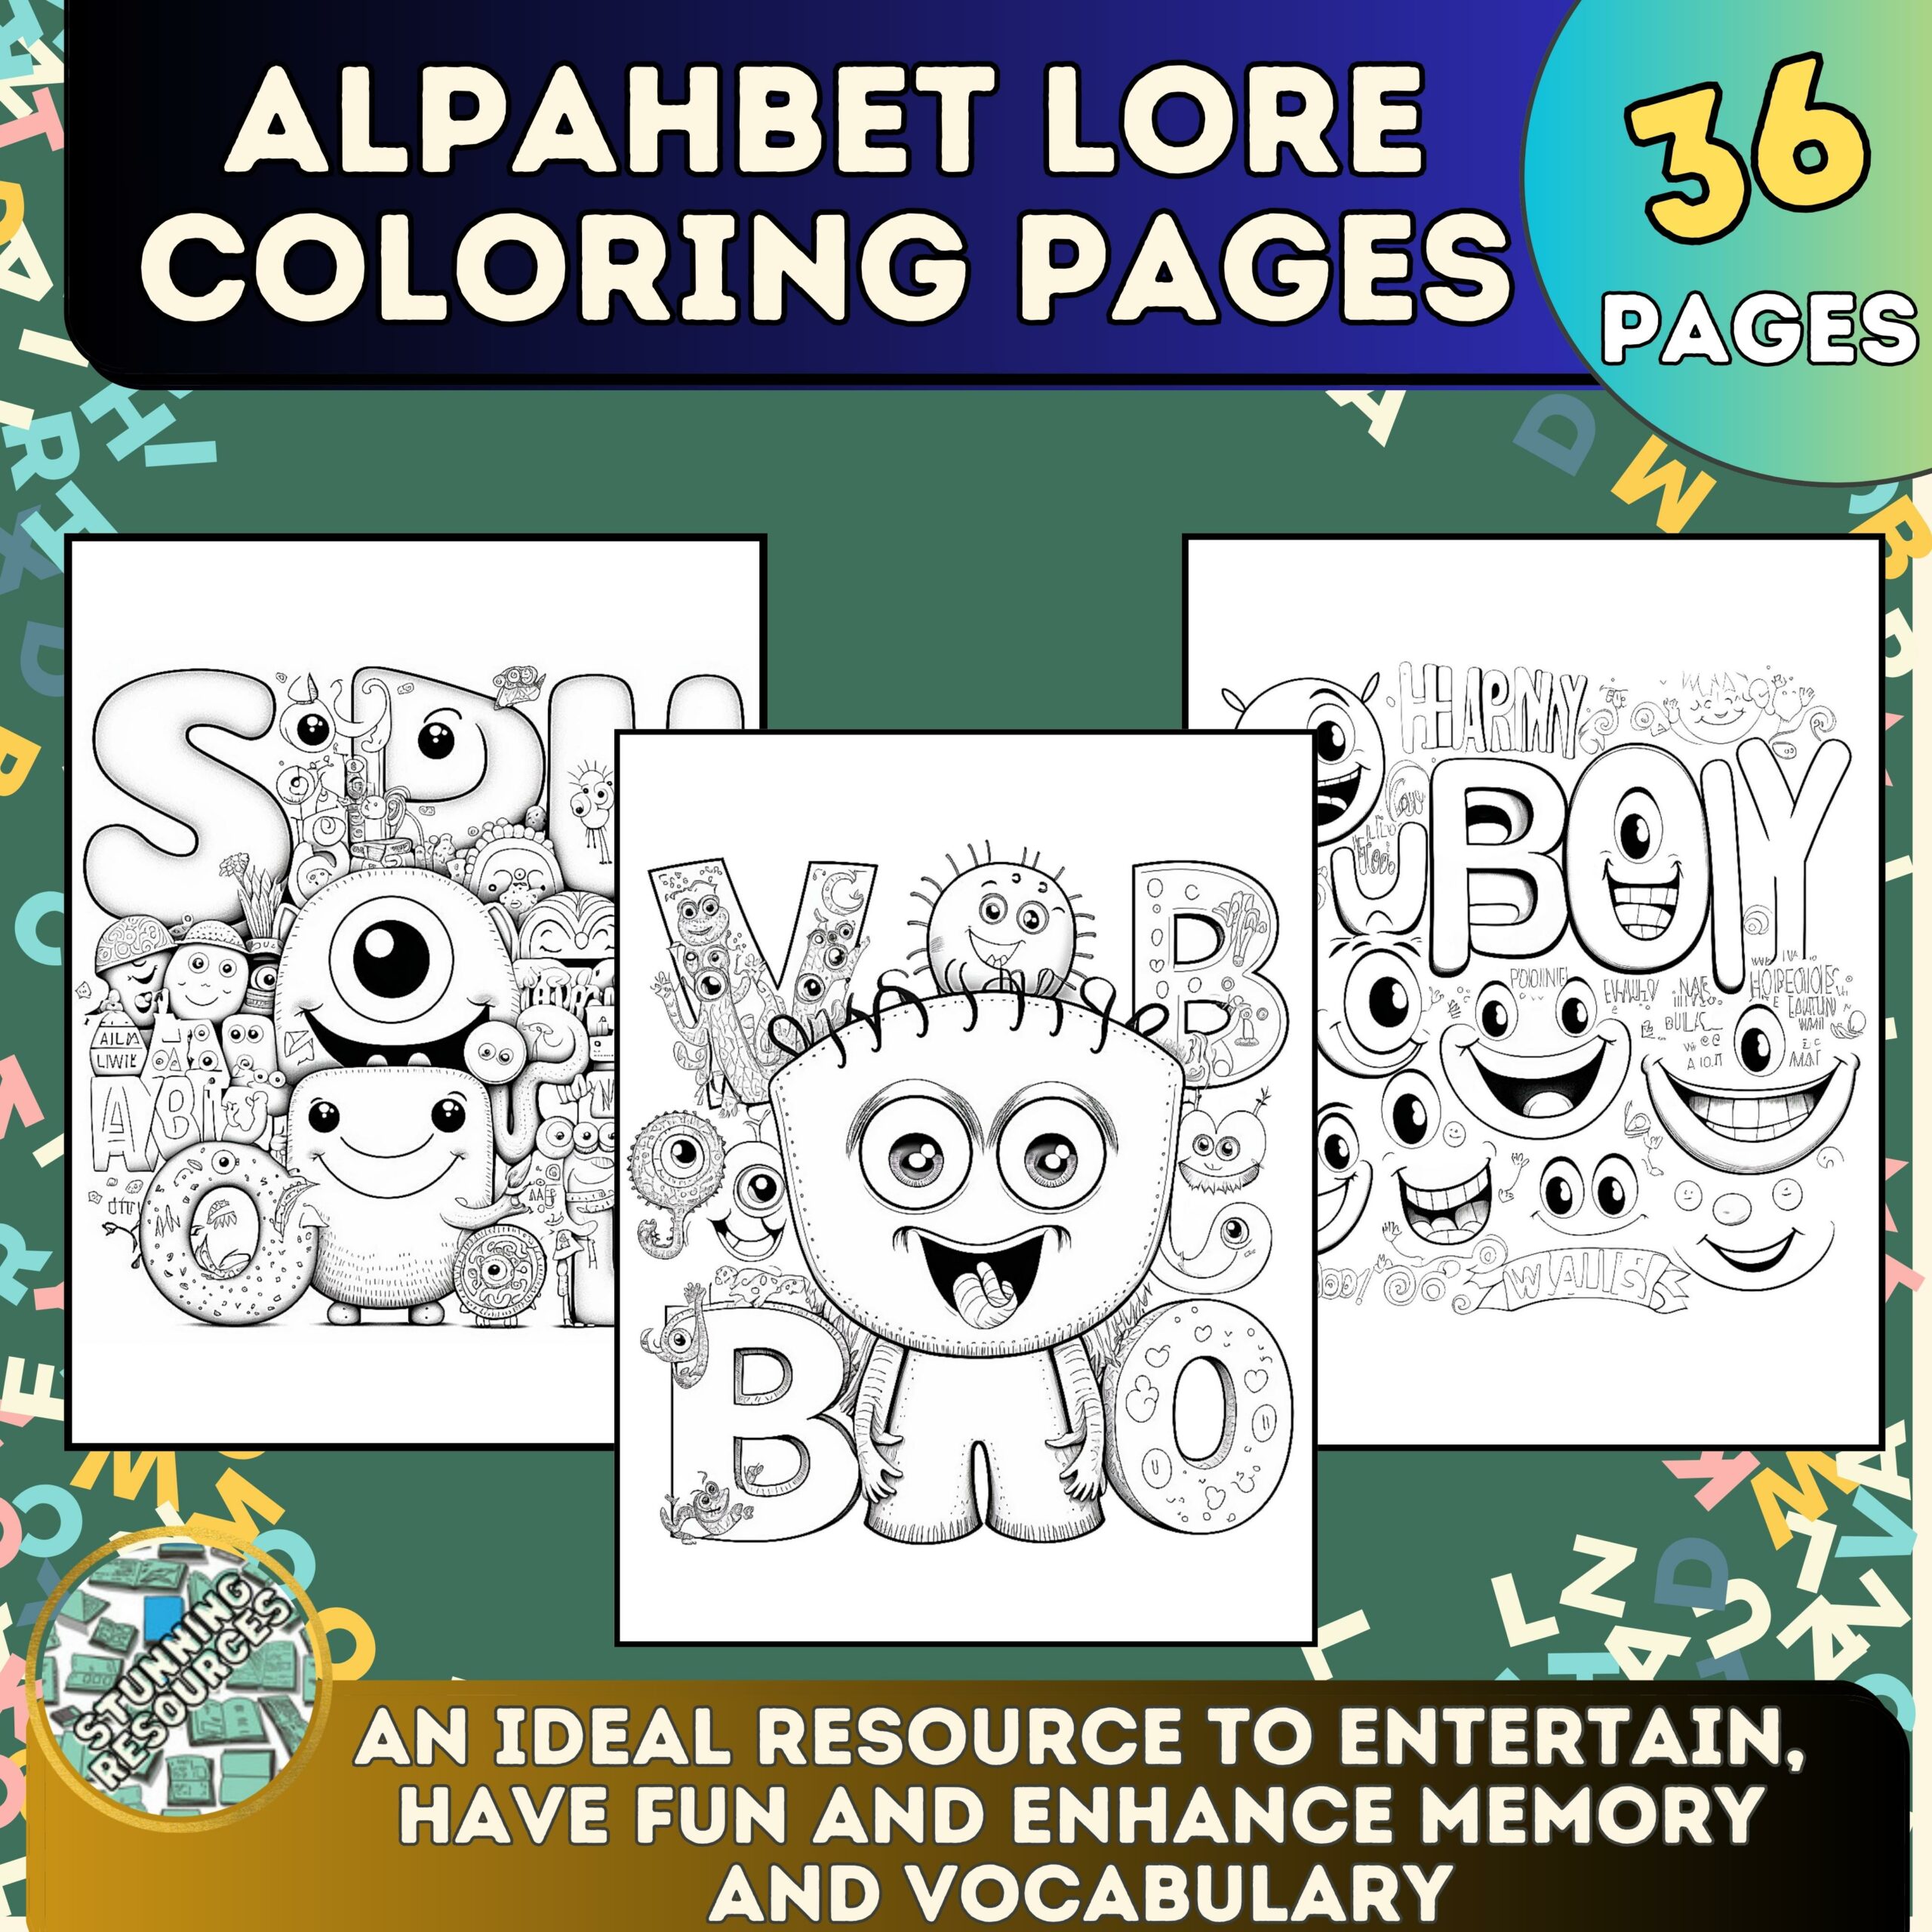 Uefinal alphabet lore coloring pages for kida and students made by teachers